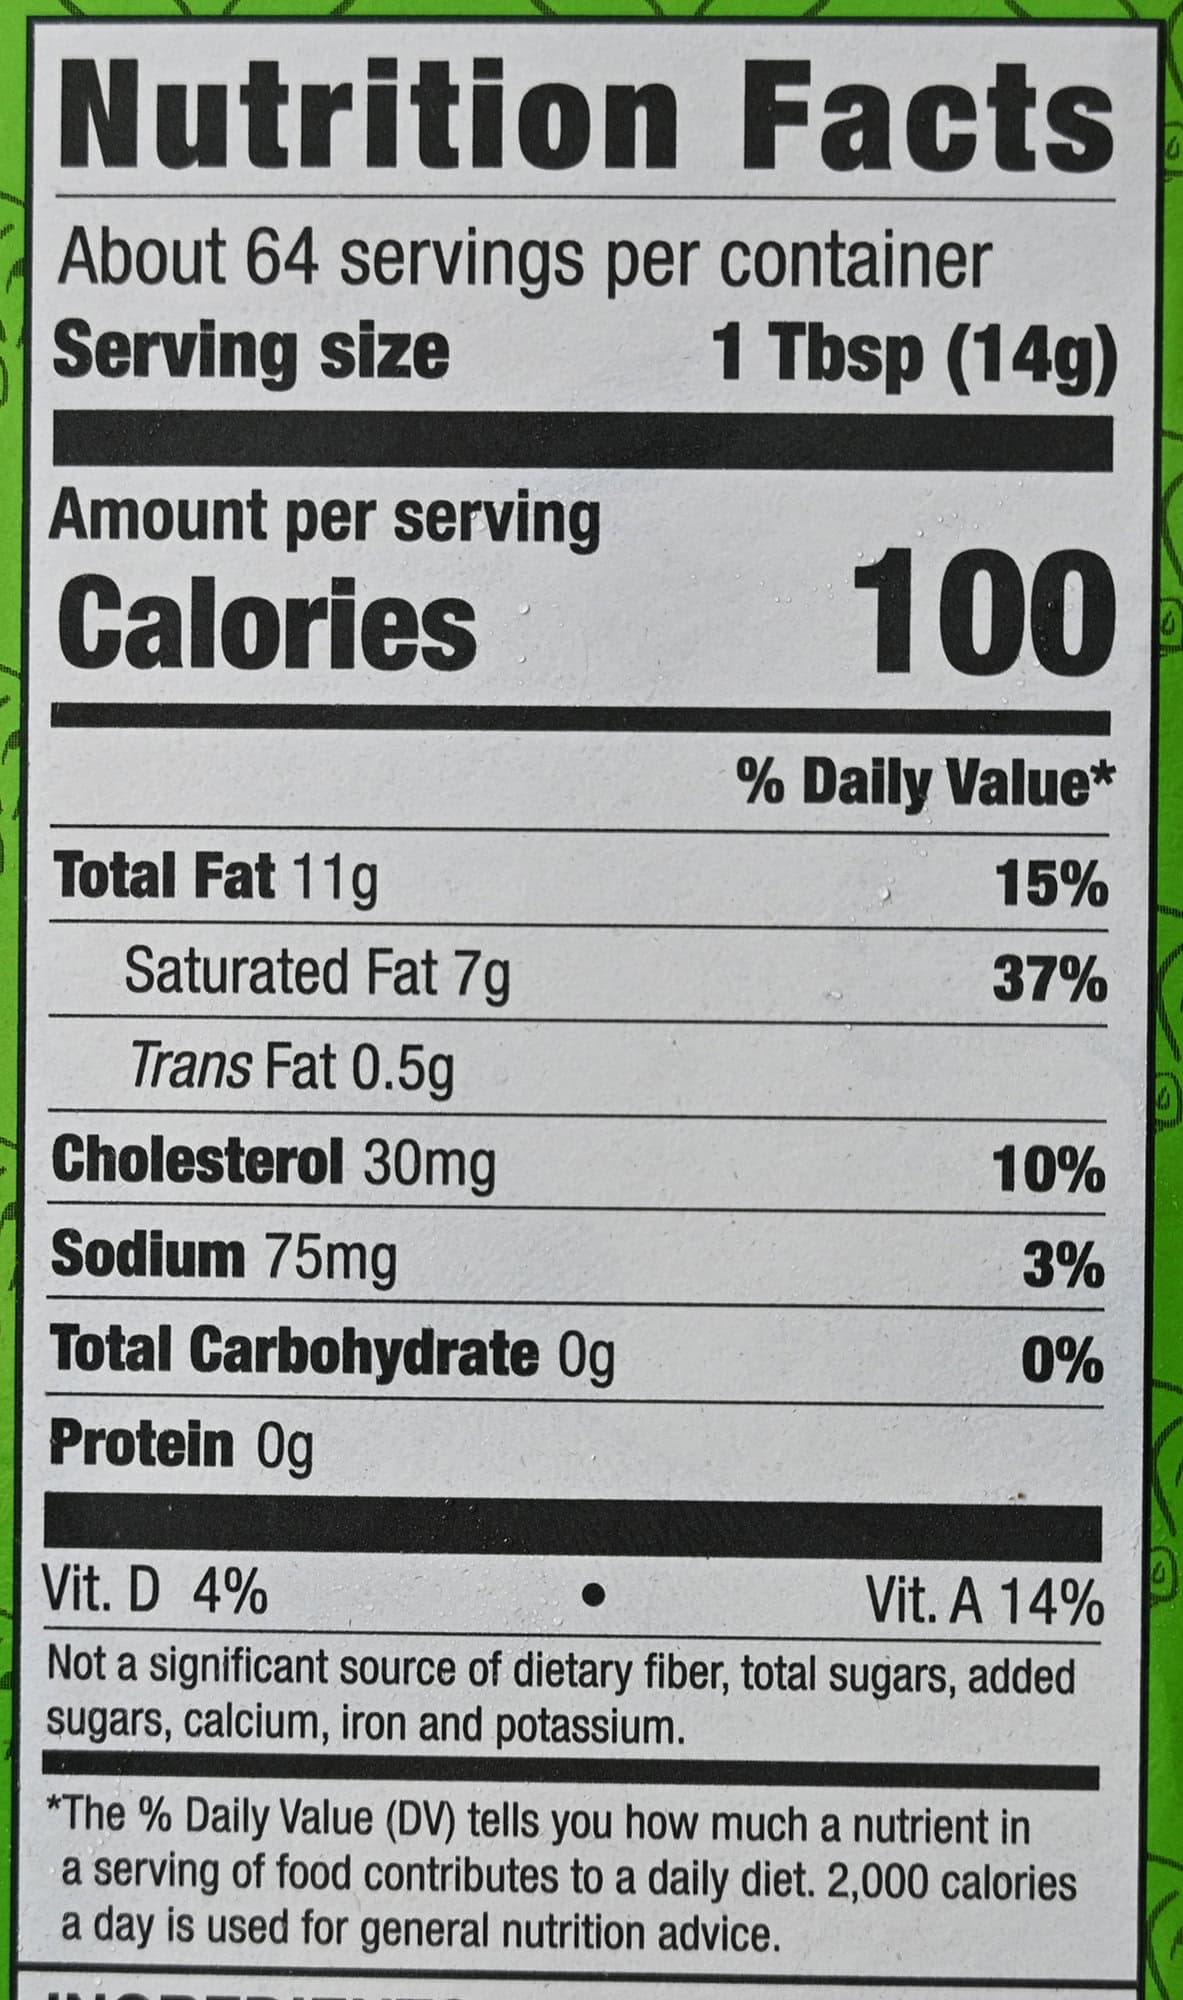 Image of the nutrition facts for the butter from the back of the box.